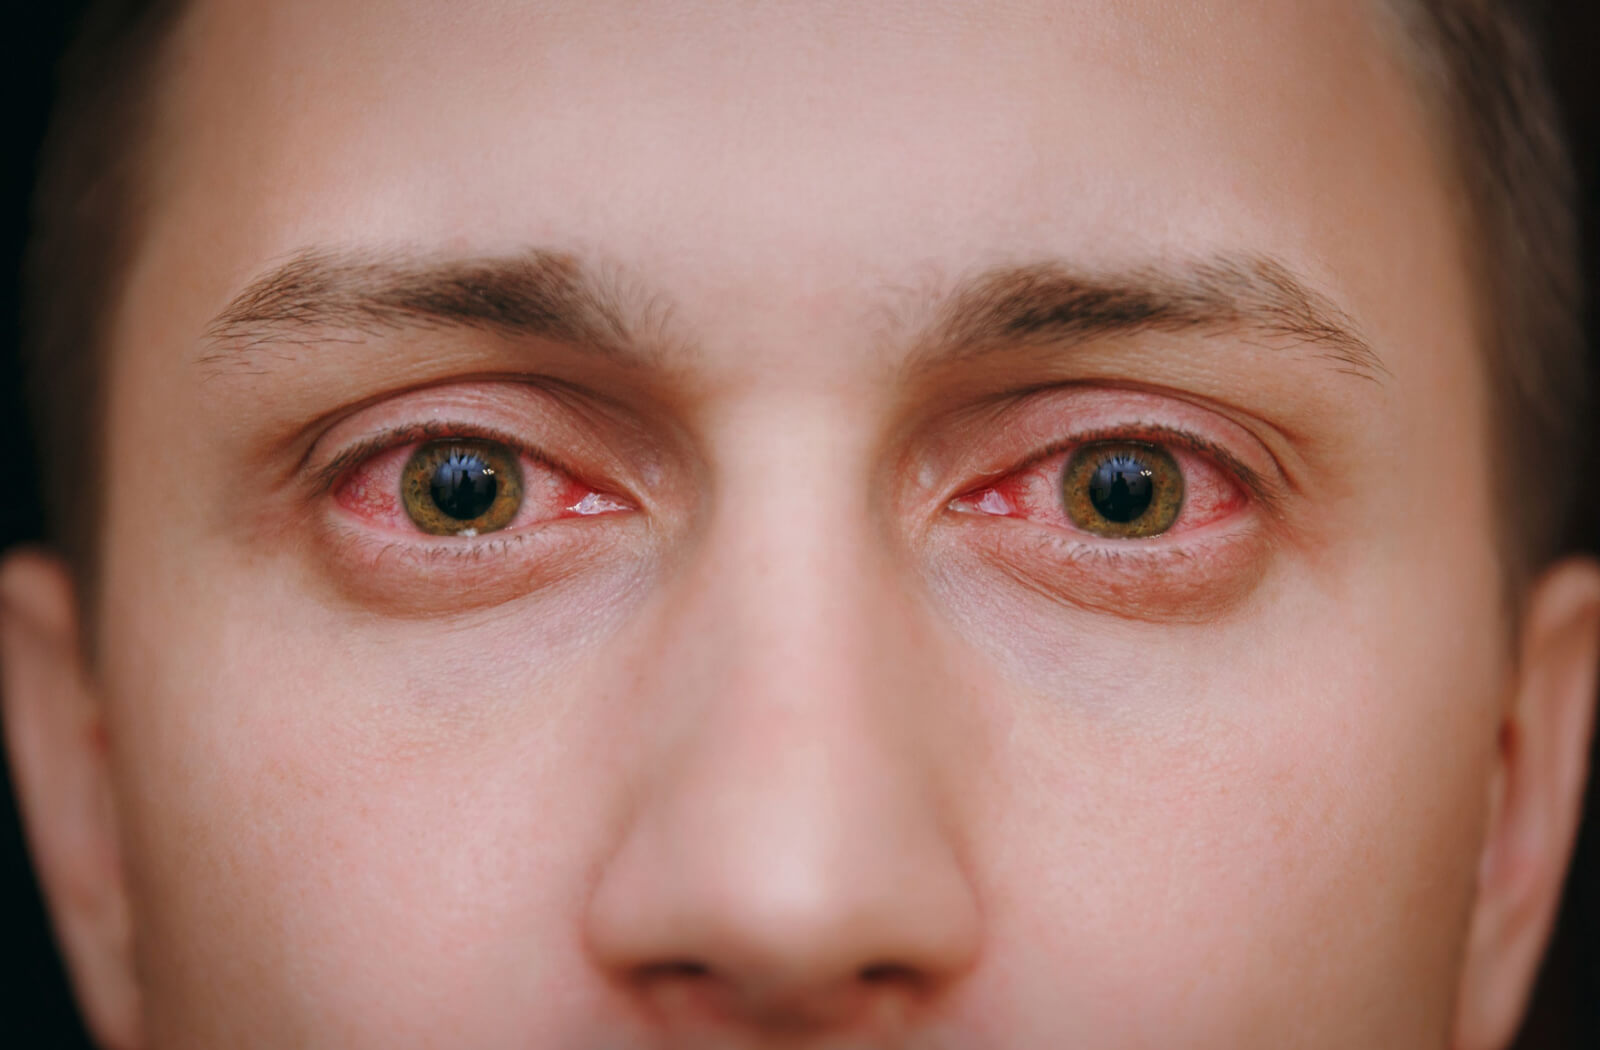 A close-up of blood-shot eyes caused by an infection.